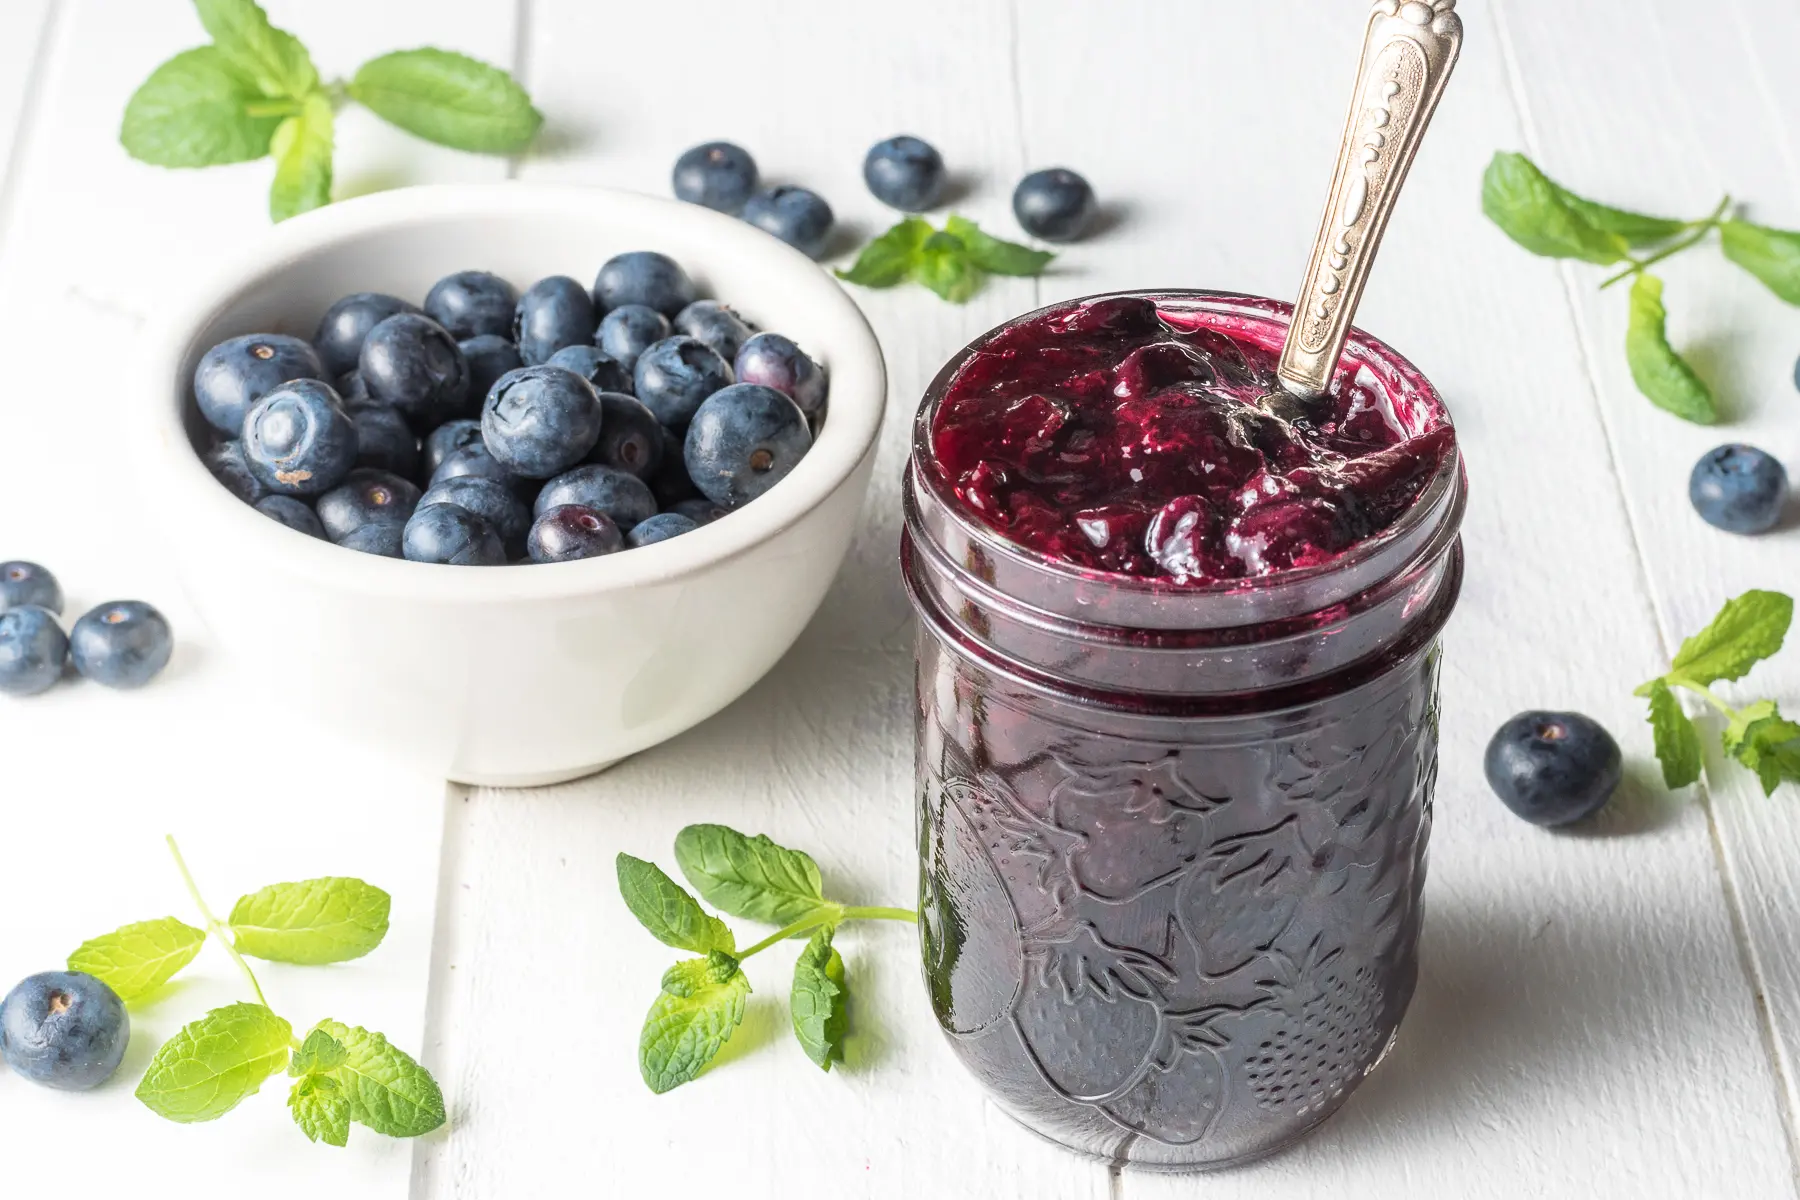 Sugar-free blueberry jam with fresh blueberries, sprigs of mint, on a white wooden board